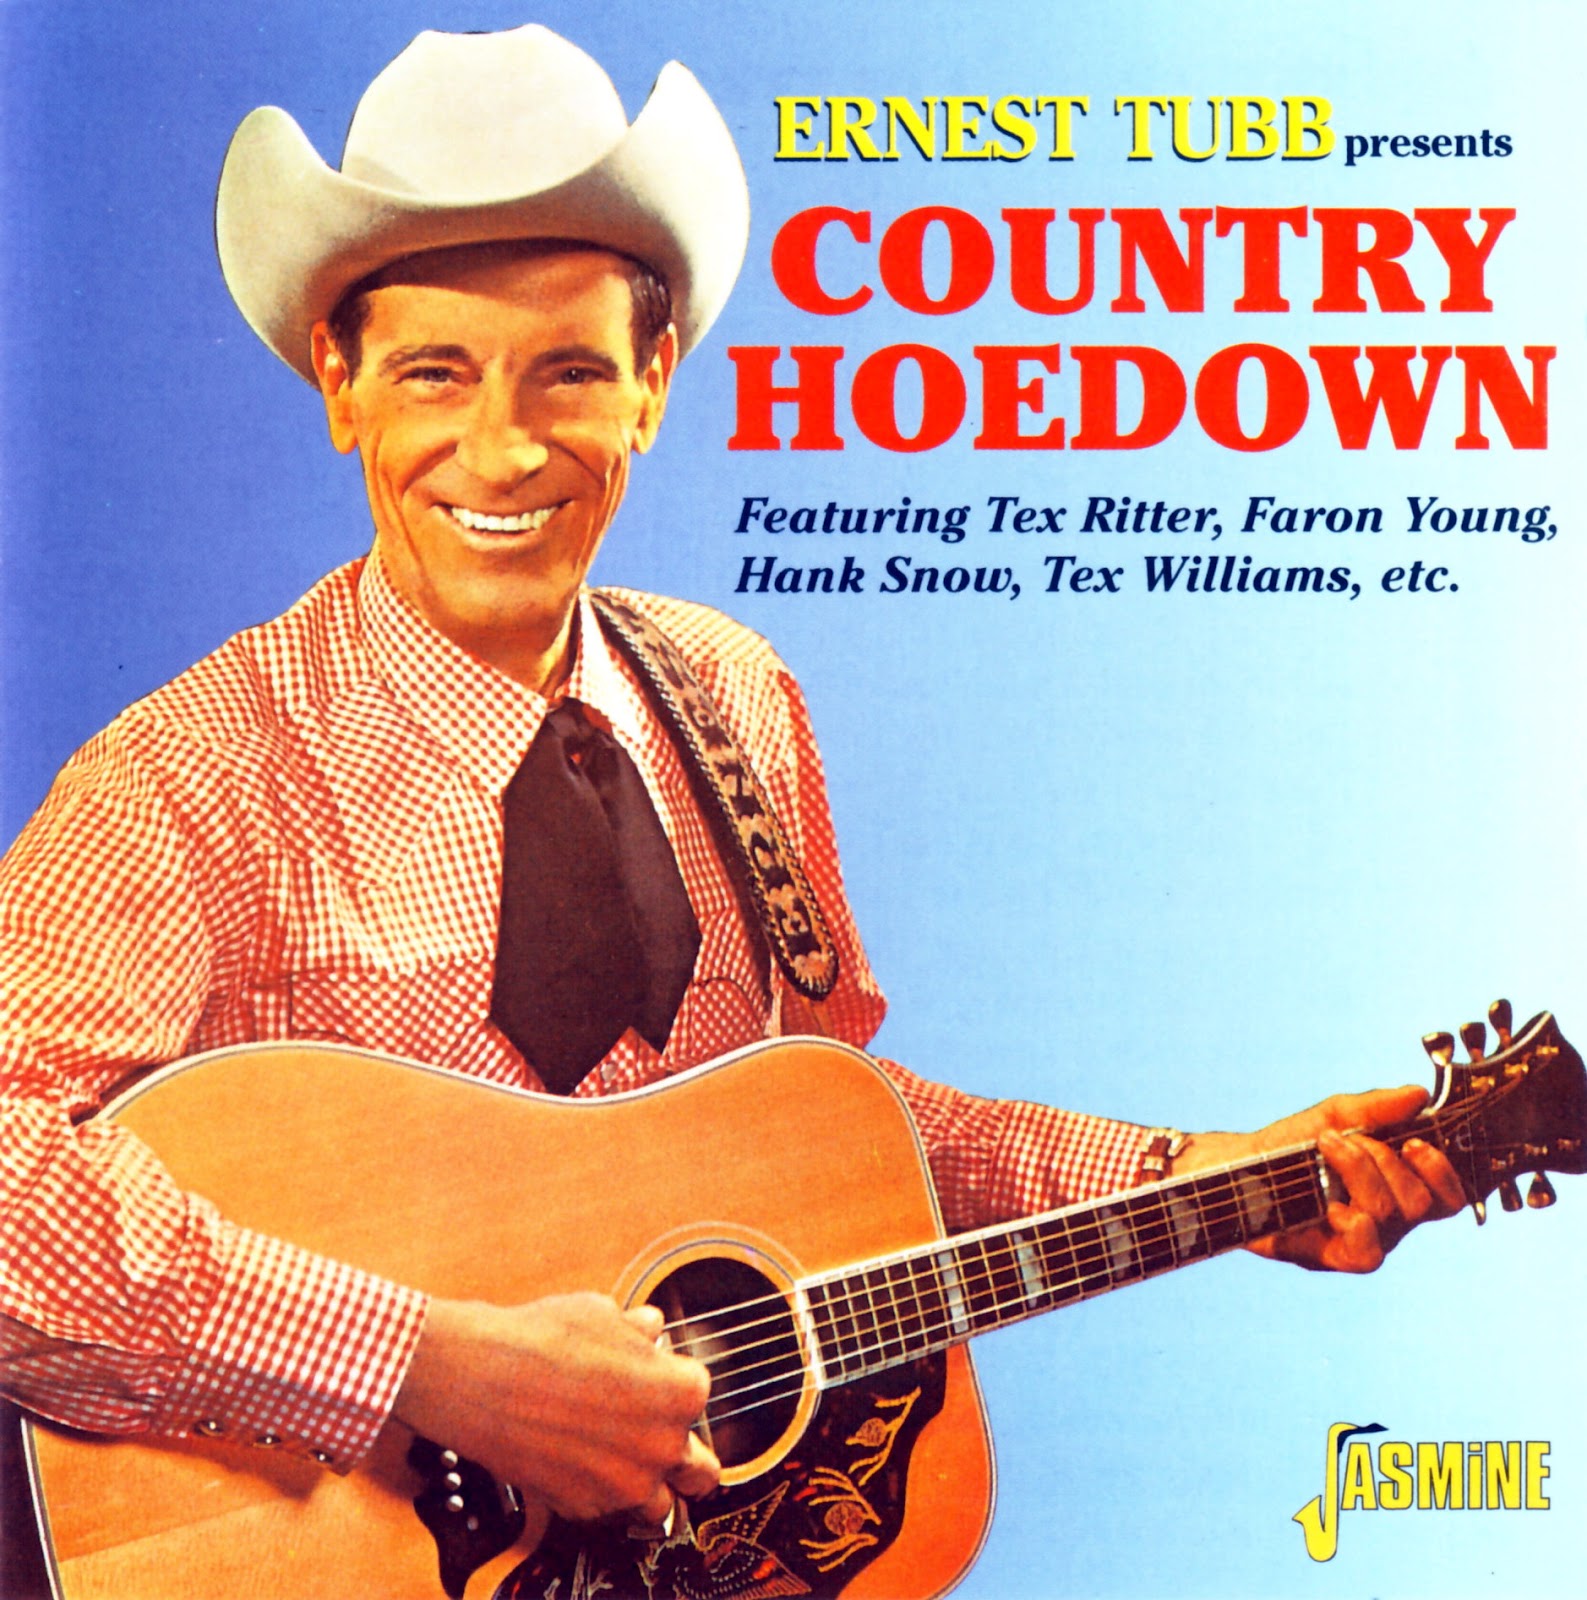 Oldies But Goodies: Ernest Tubb Presents Country Hoedown